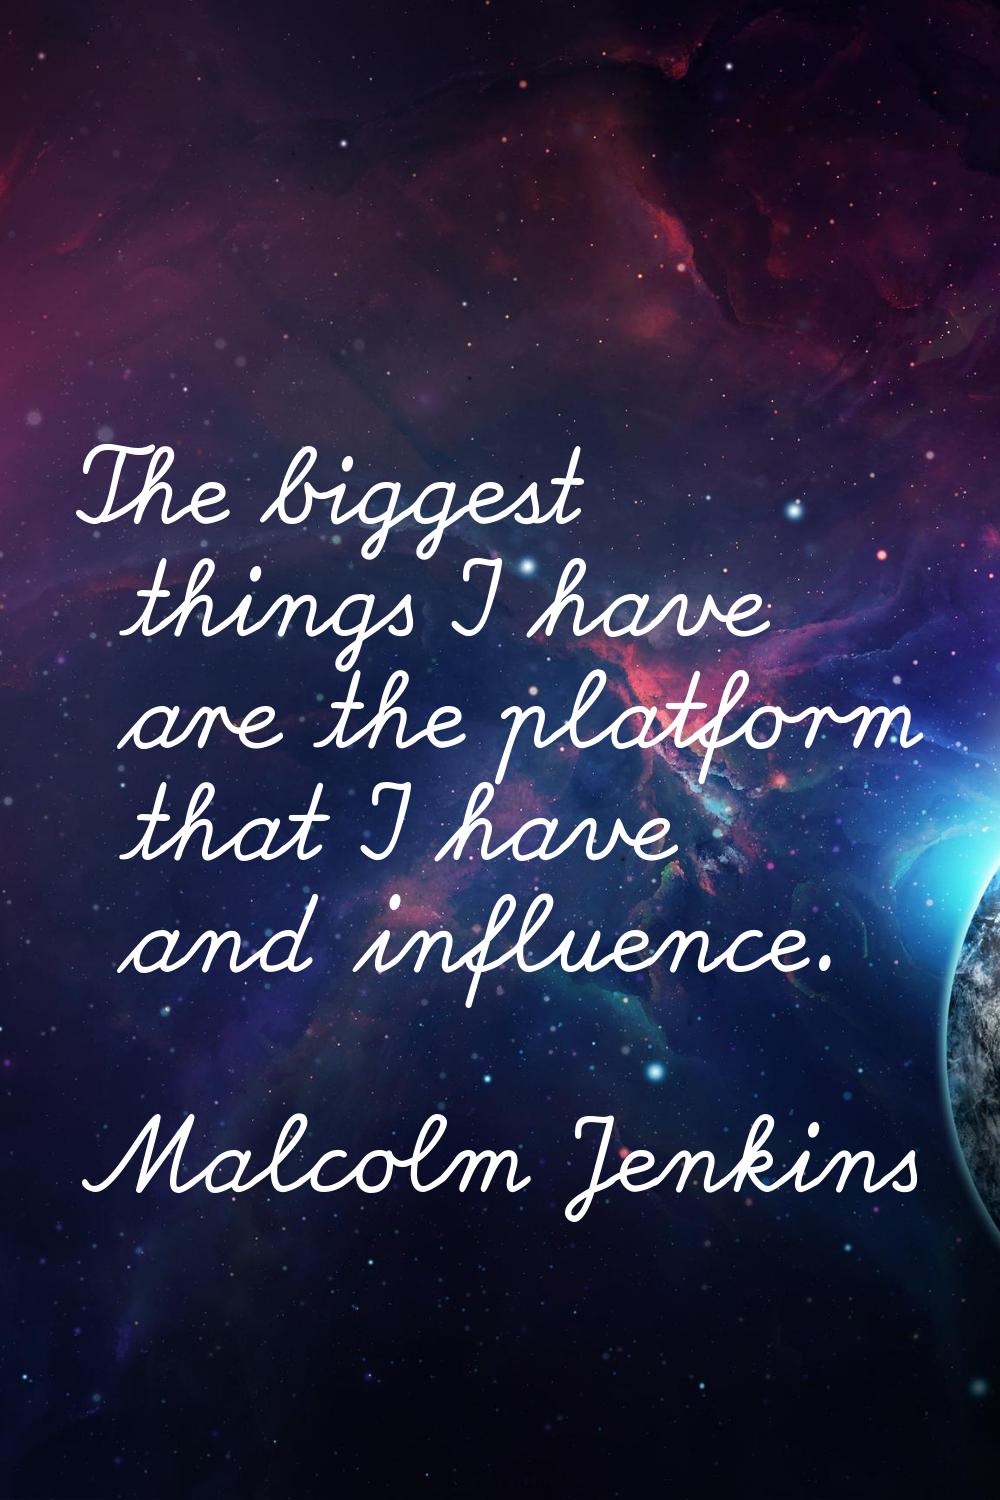 The biggest things I have are the platform that I have and influence.